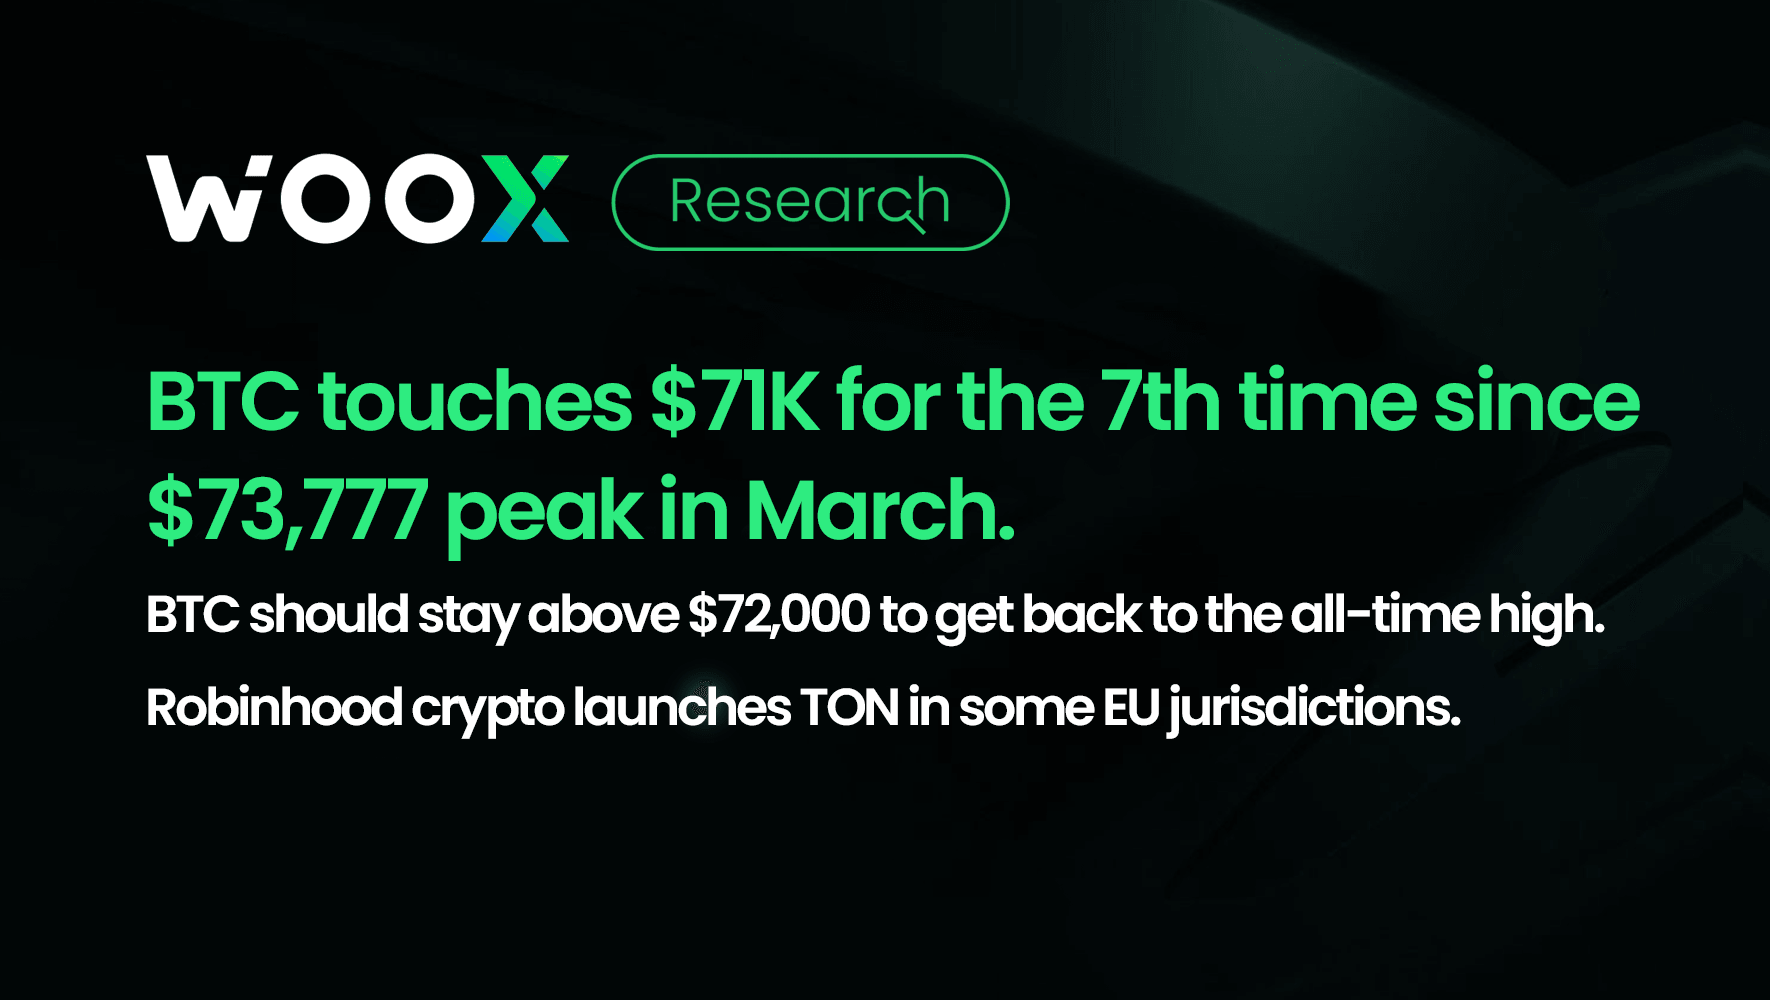 BTC touches $71K for the 7th time since $73,777 peak in March.